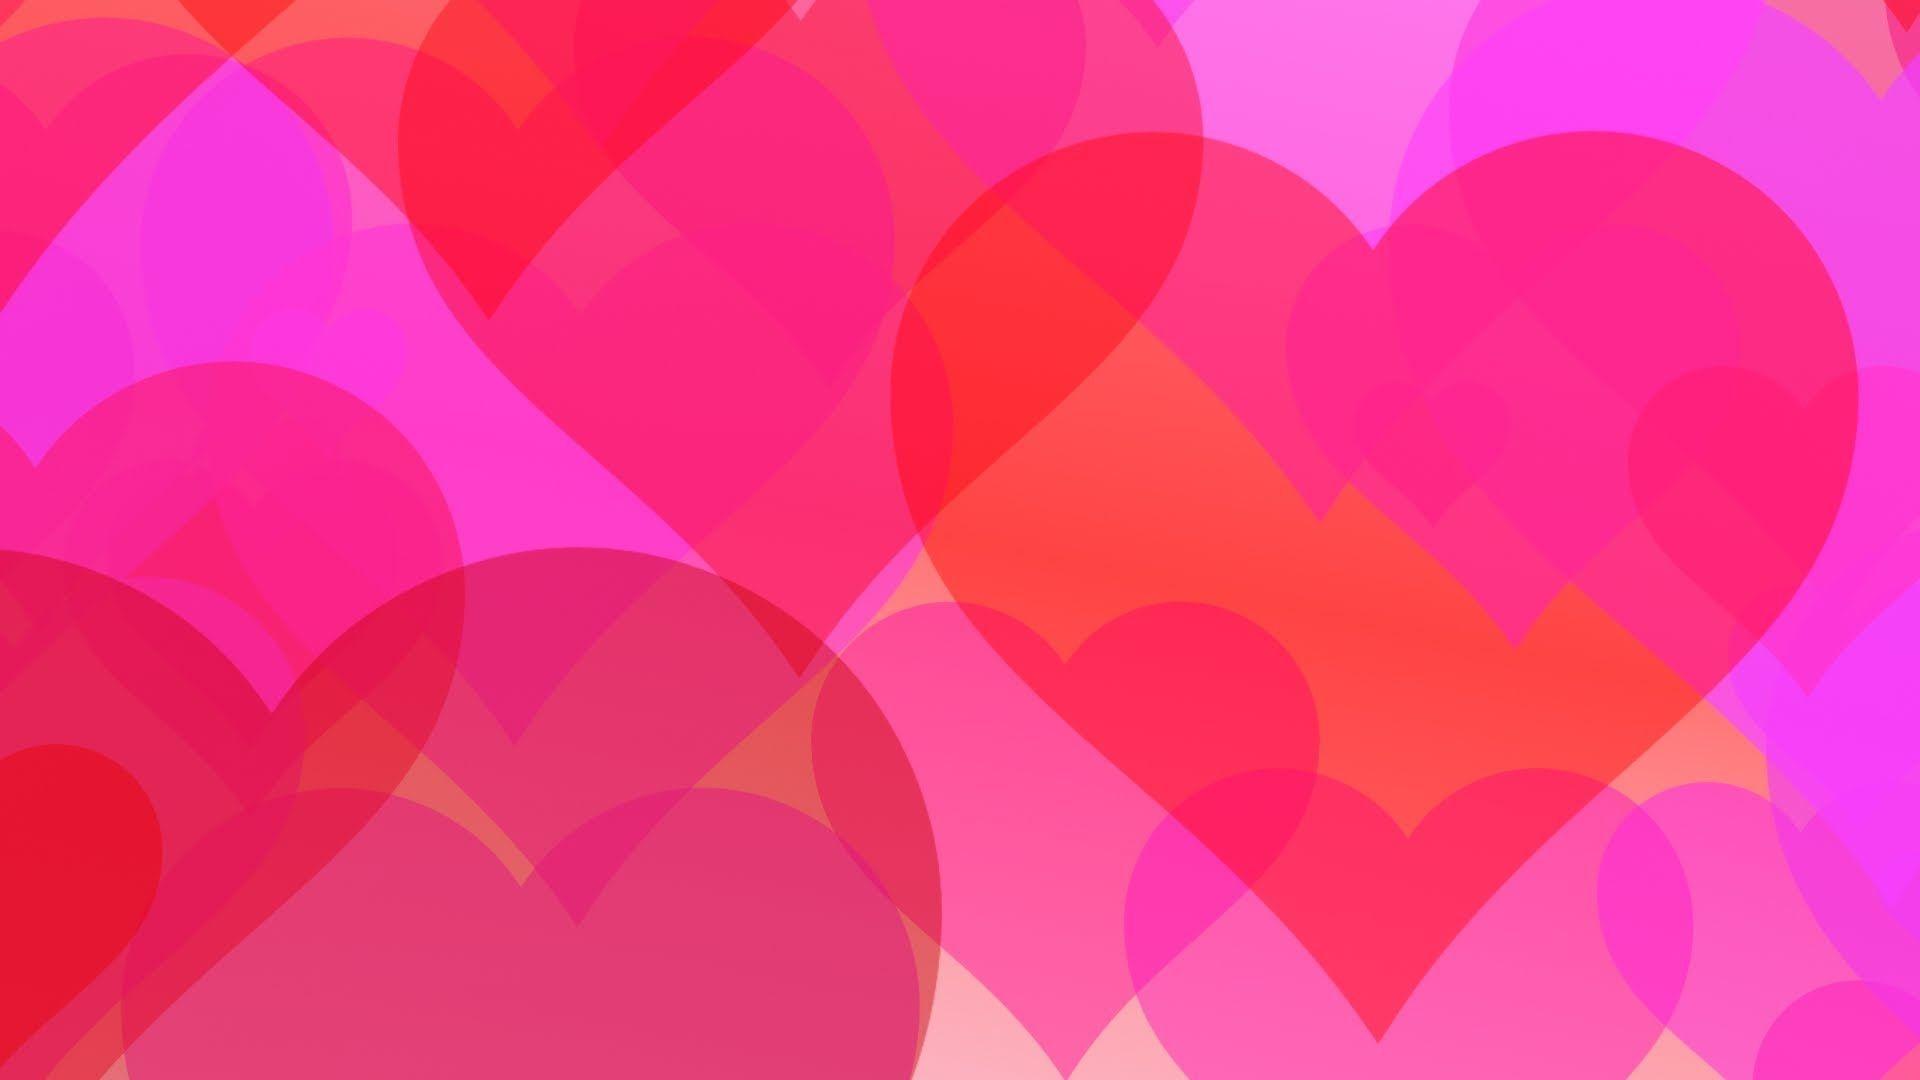 Love hearts romantic animated background